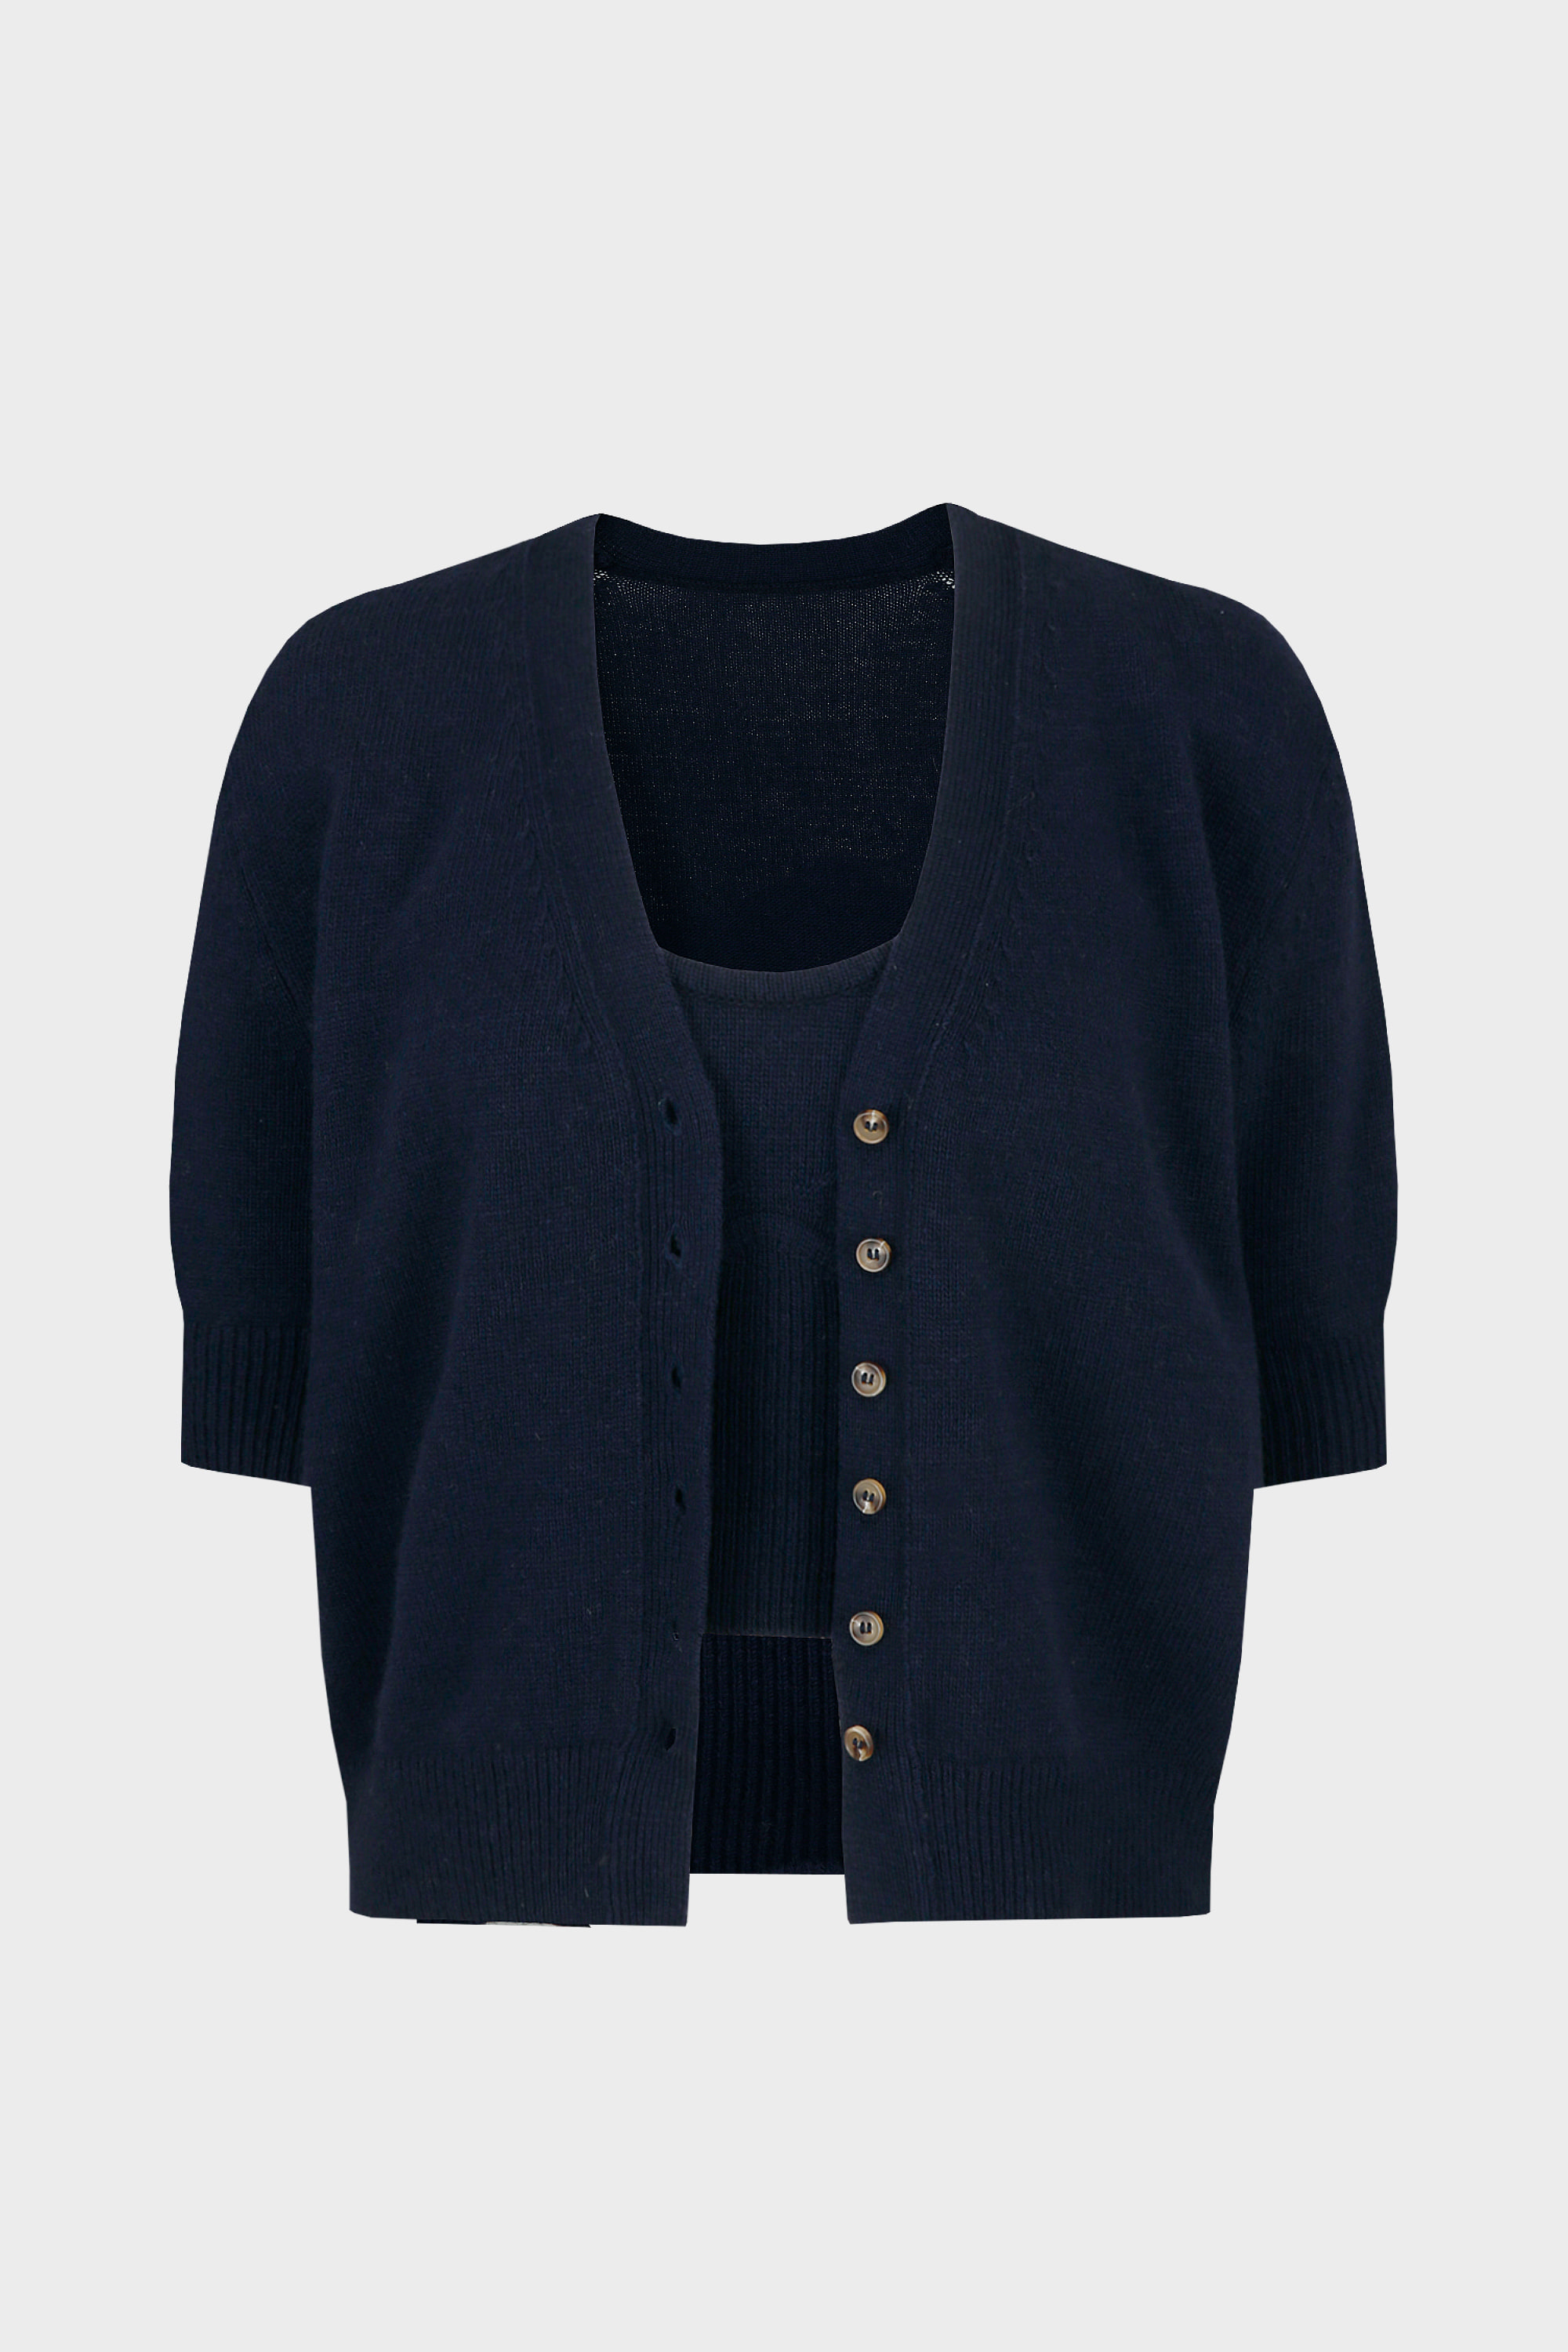 HIGH QUALITY LINE - KNIT BRALETTE AND CARDIGAN SET (NAVY)